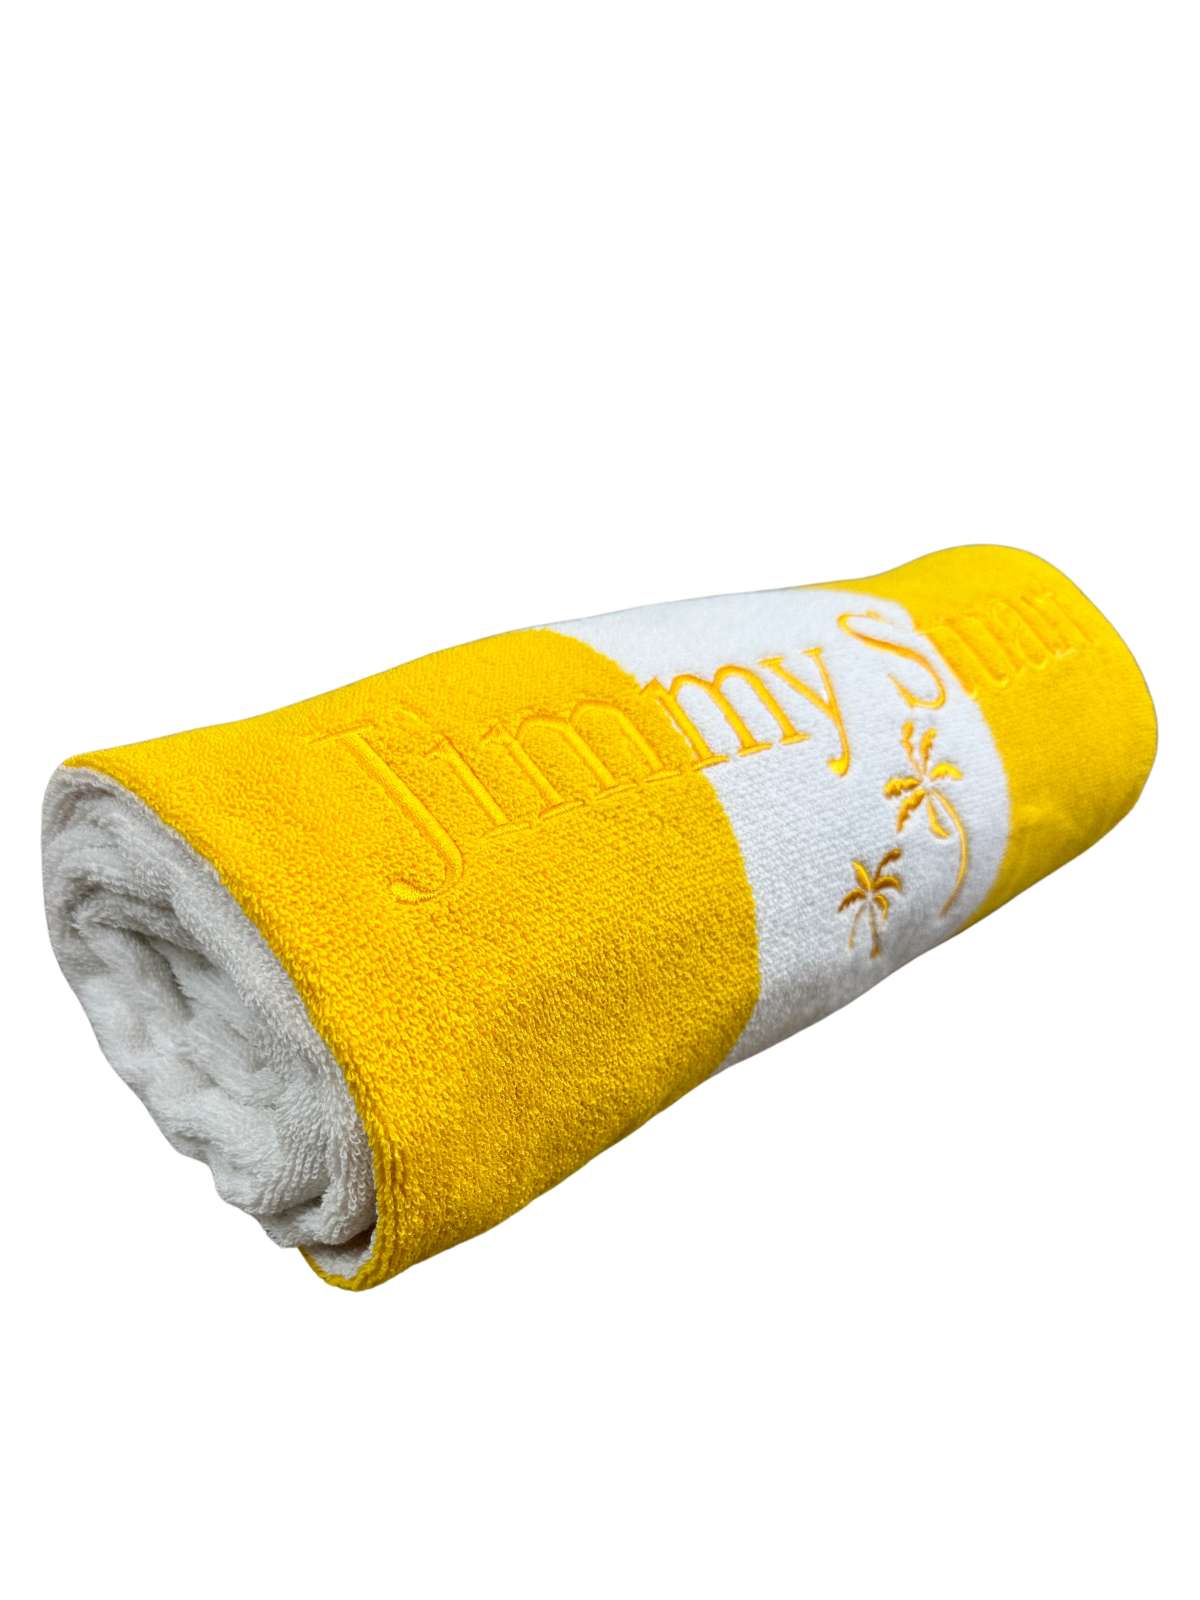 Yellow and White Striped Towel